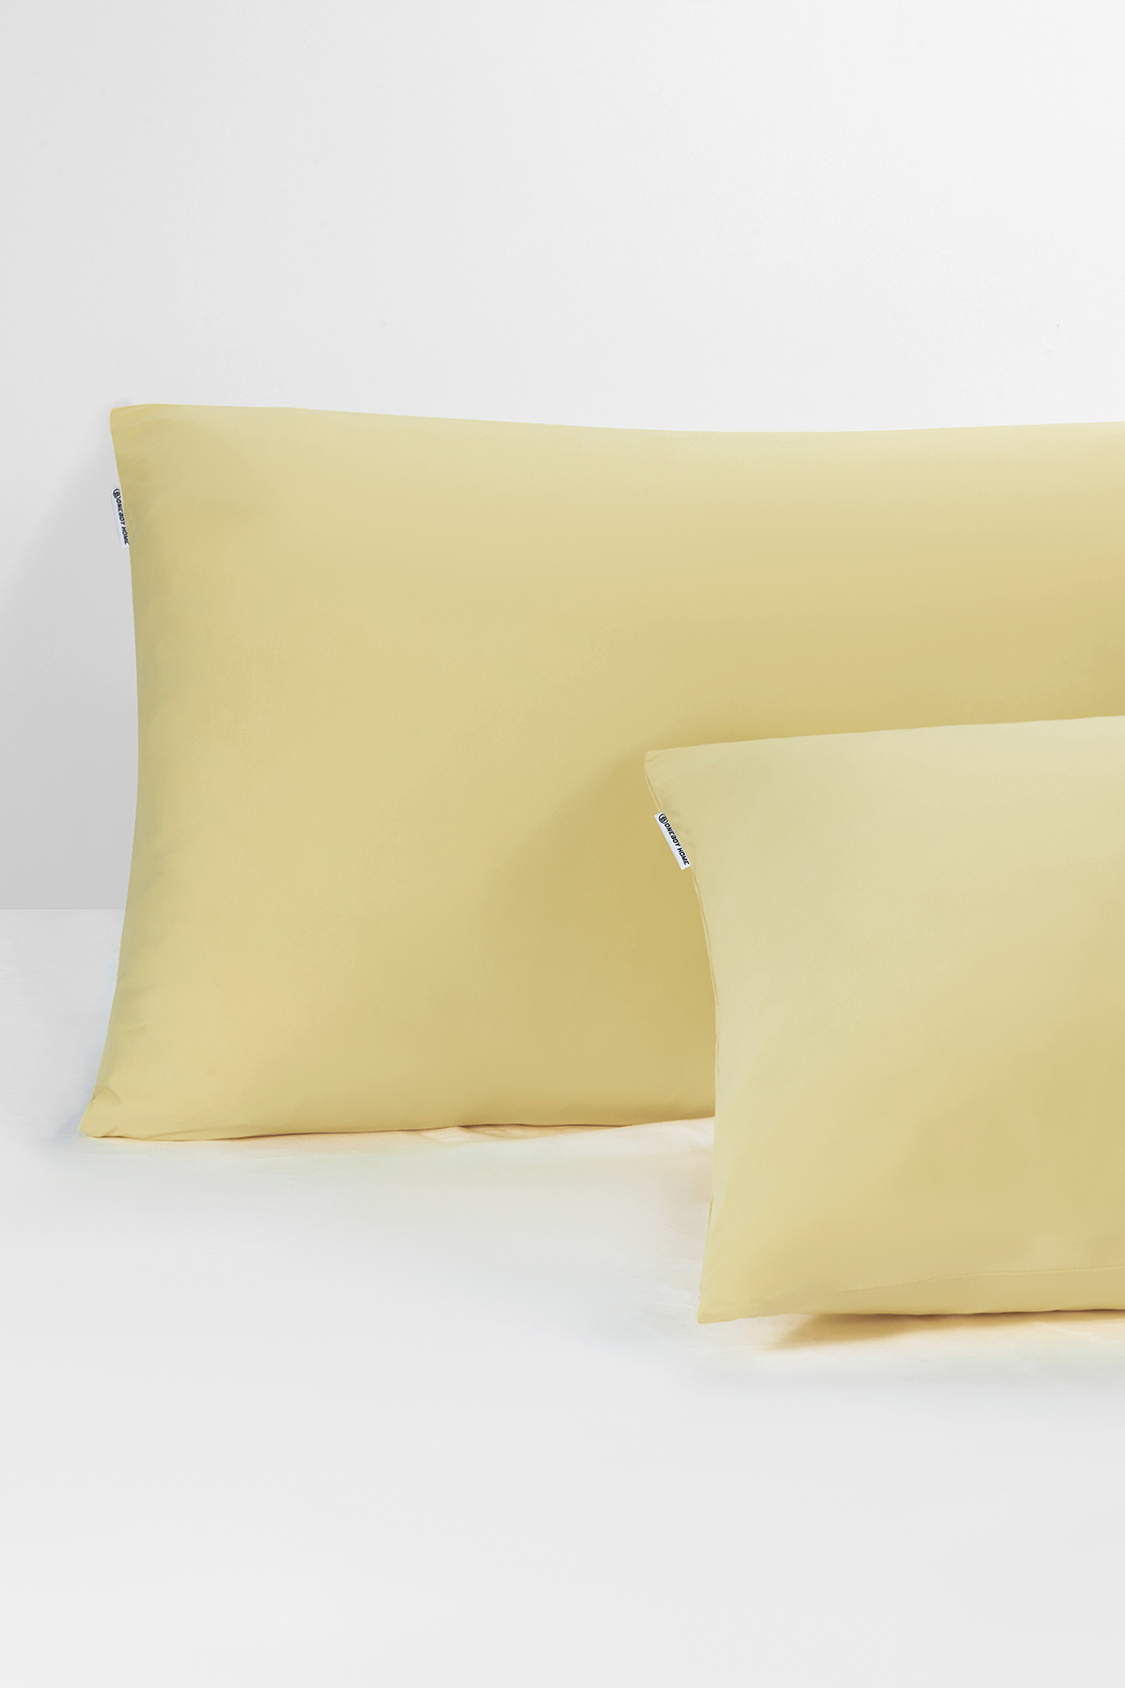 Ice-Tech Smooth Antibacterial Pillowcases (2-Pack)